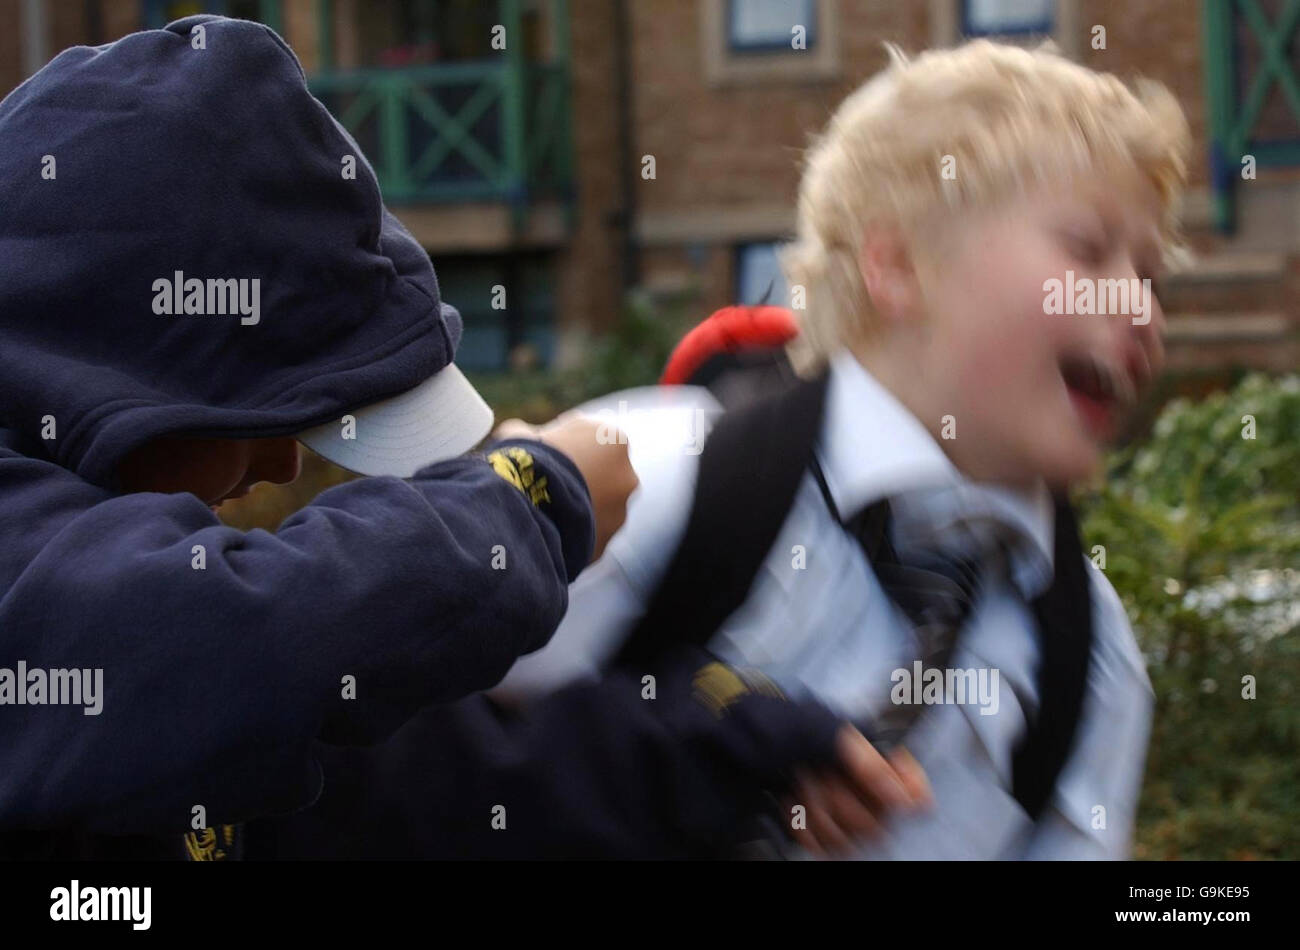 Posed photograph simulating a child being bullied. Stock Photo